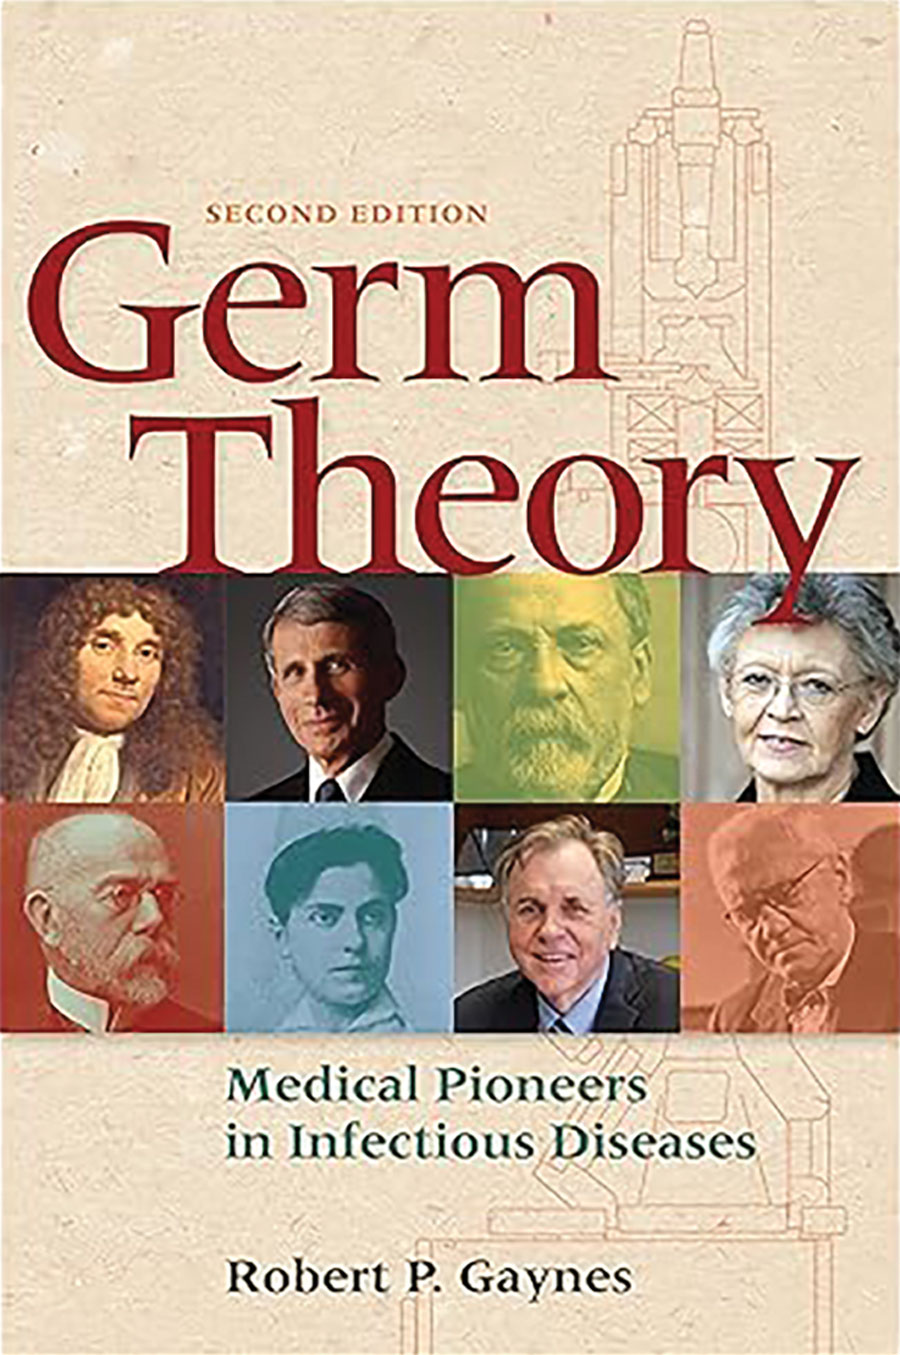 Germ Theory: Medical Pioneers in Infectious Diseases, 2nd Edition